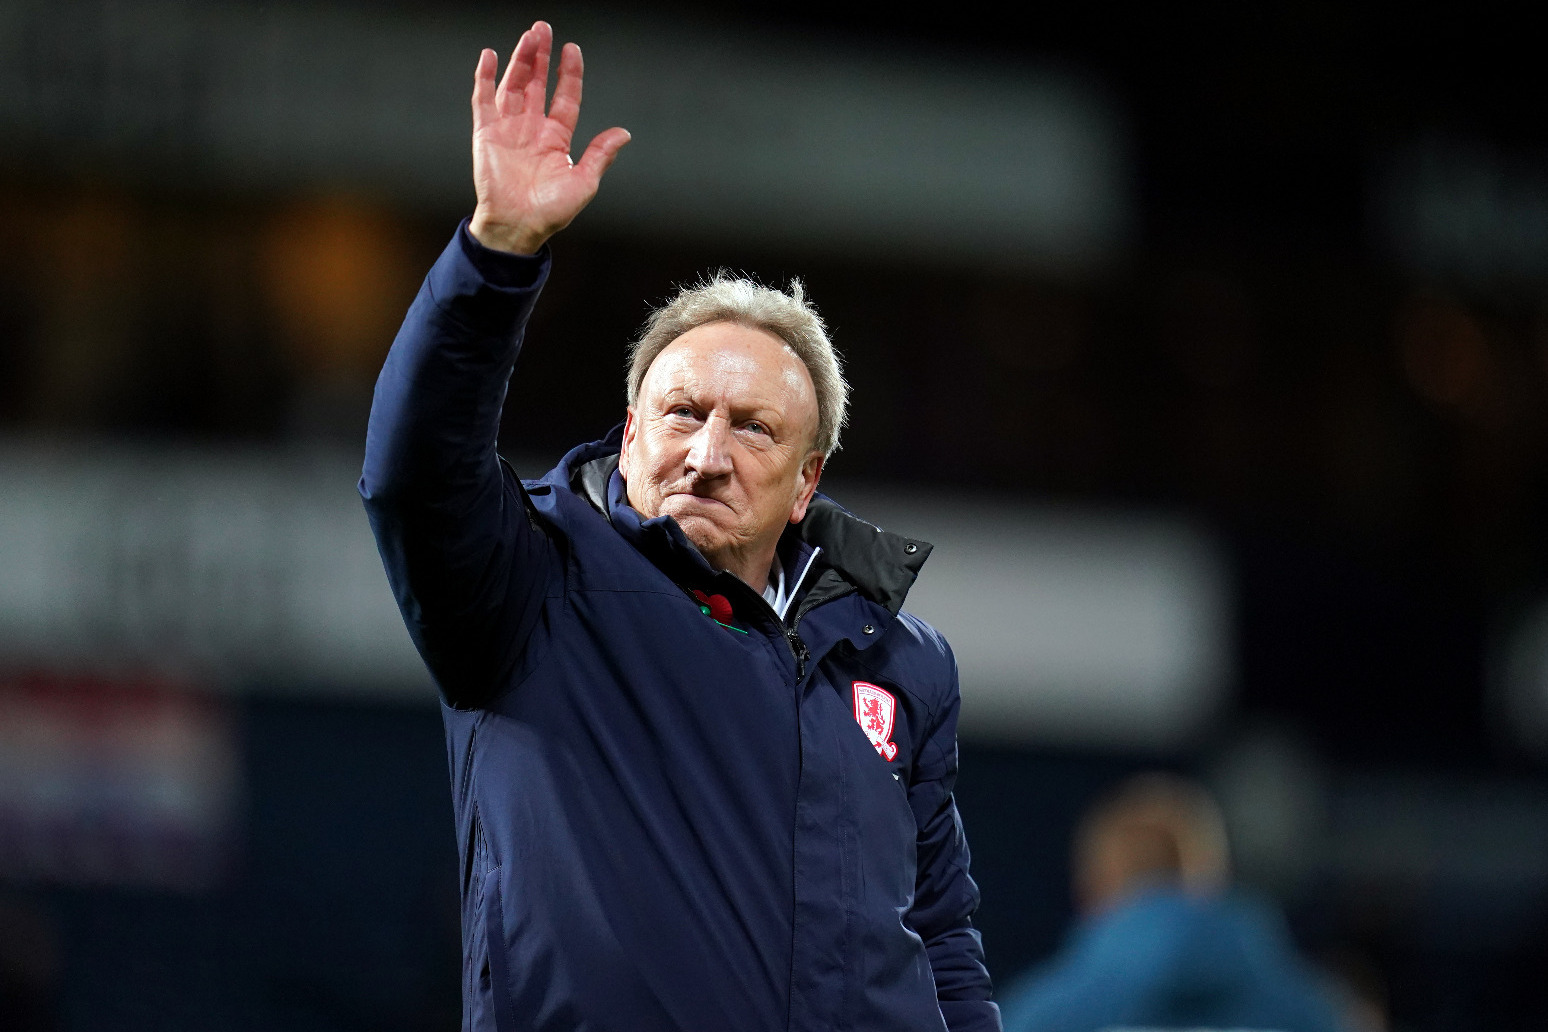 Neil Warnock leaves Middlesbrough after West Brom draw 